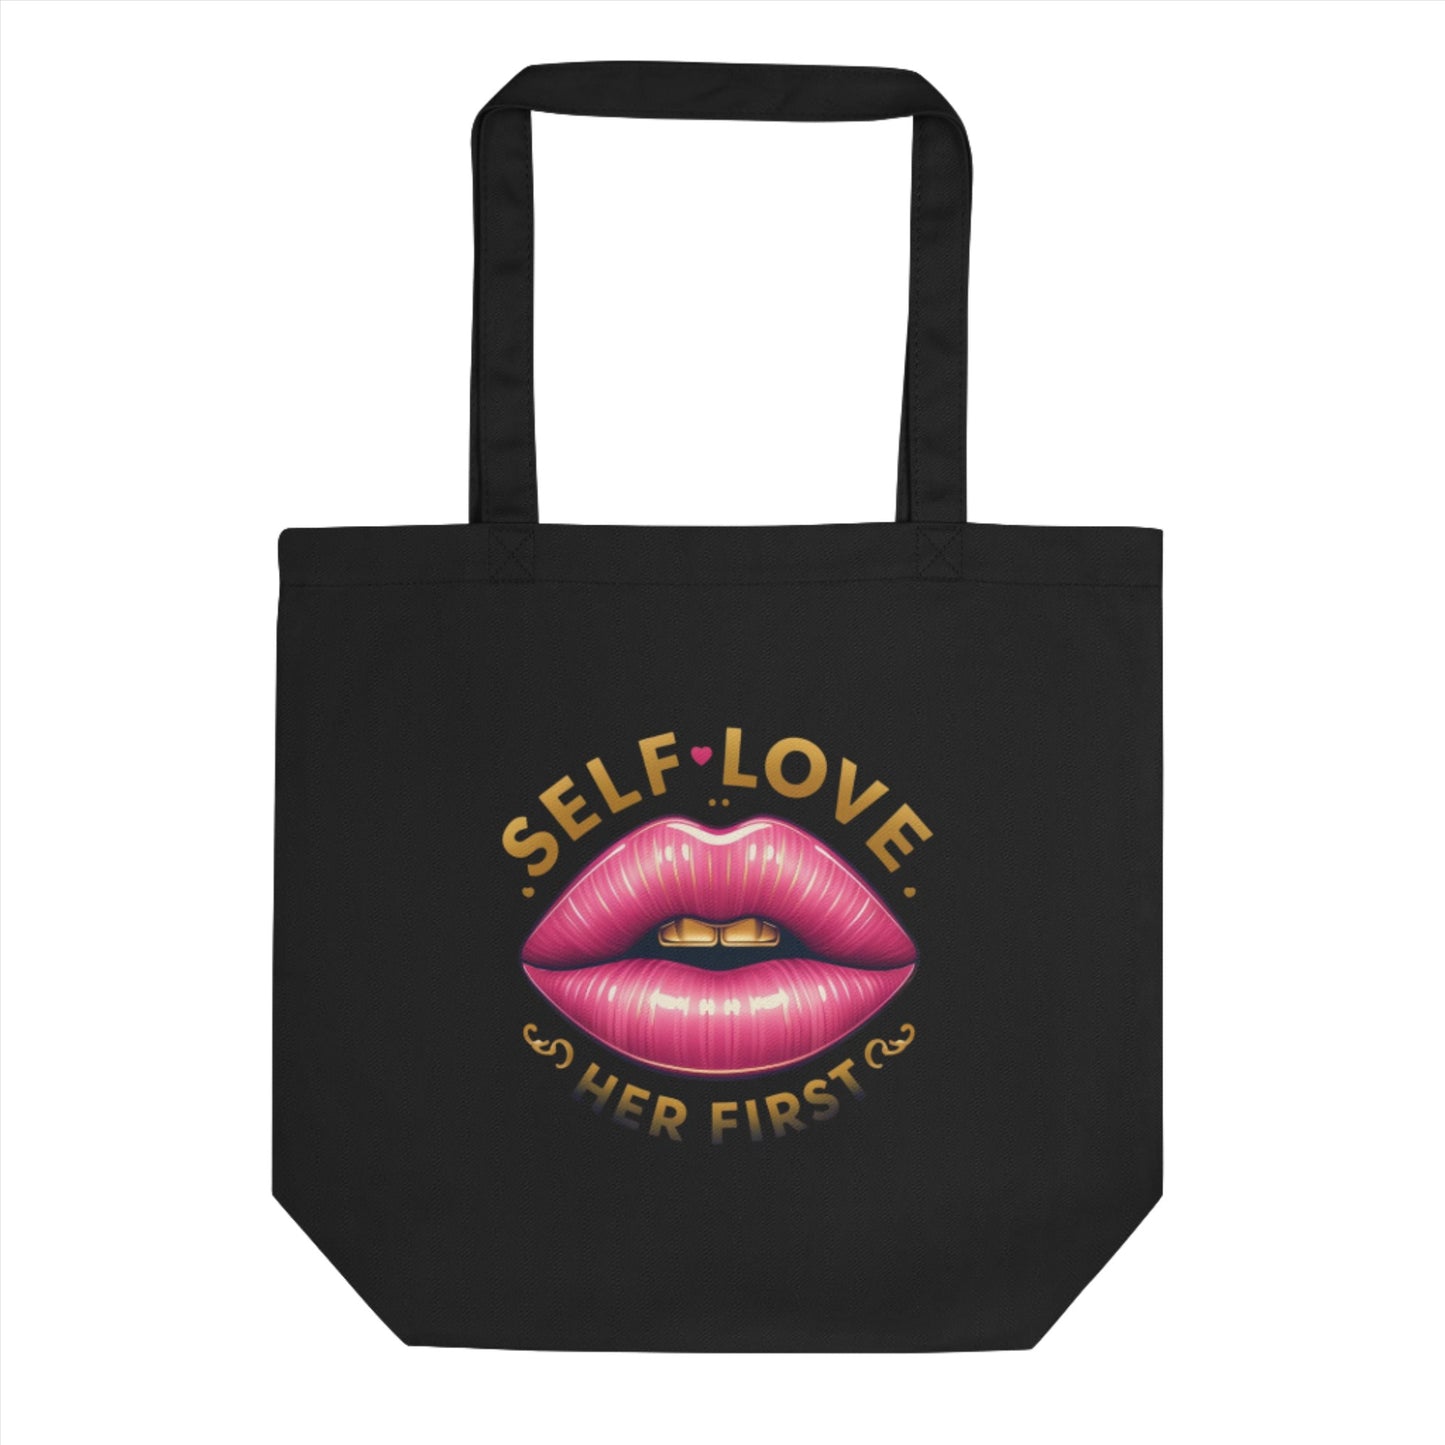 Self Love Her First Eco Tote Bag